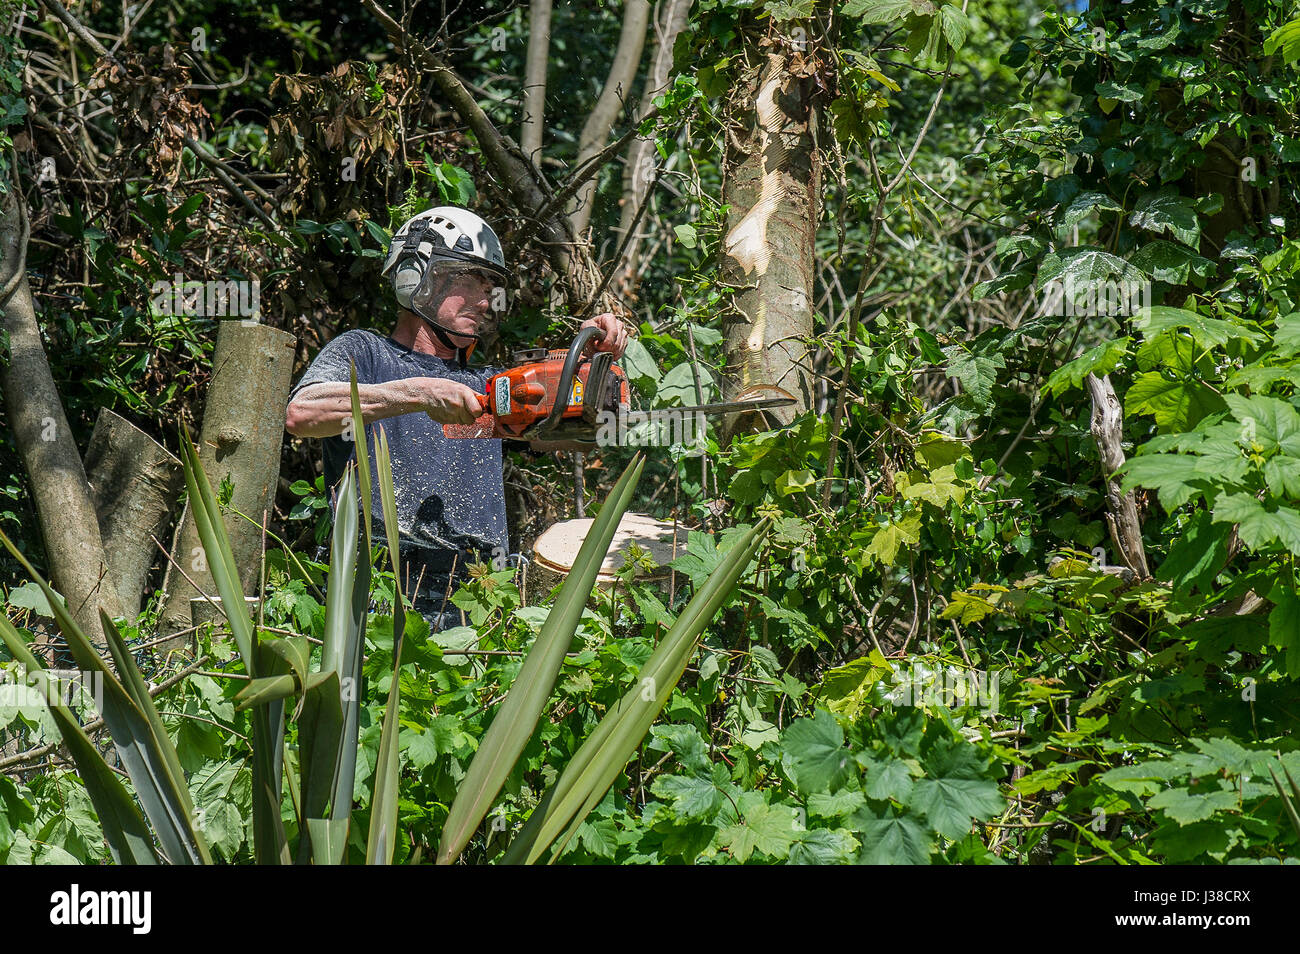 A tree surgeon lopping off branches of a sycamore tree Arboriculturist Climbing Safety harness Rope Ropes Roped Working at height Stock Photo